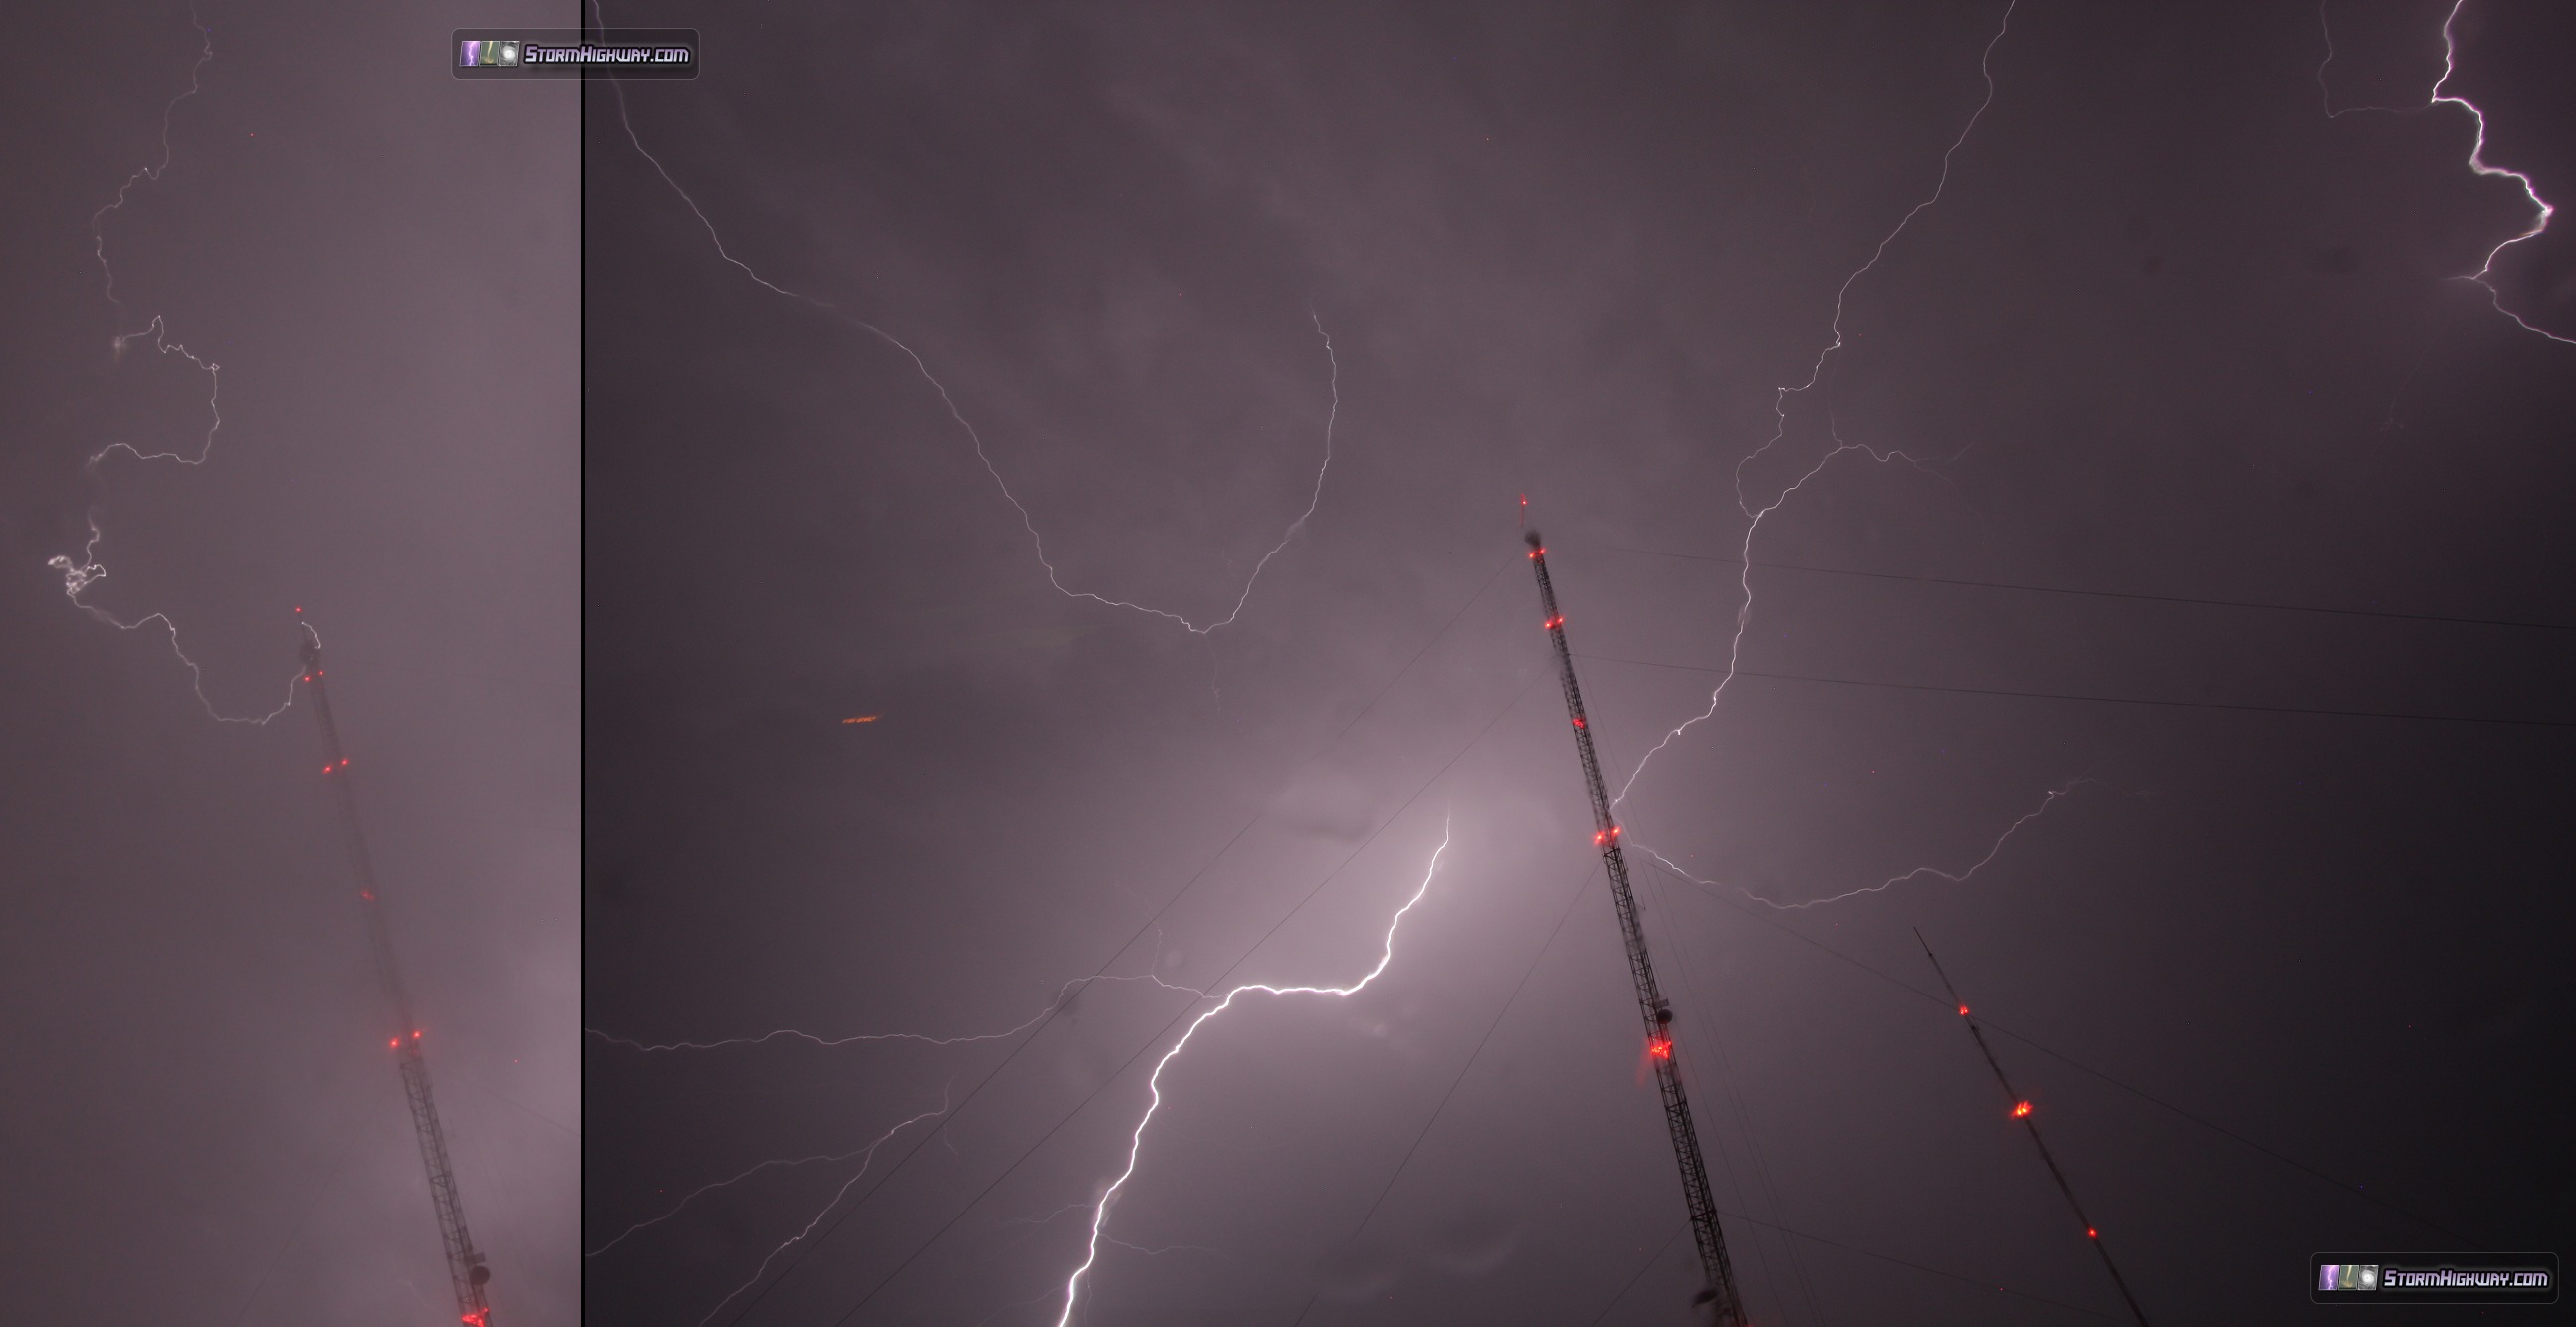 Lightning at Floyds Knobs TV towers - New Albany, IN - Louisville metro - July 26, 2014